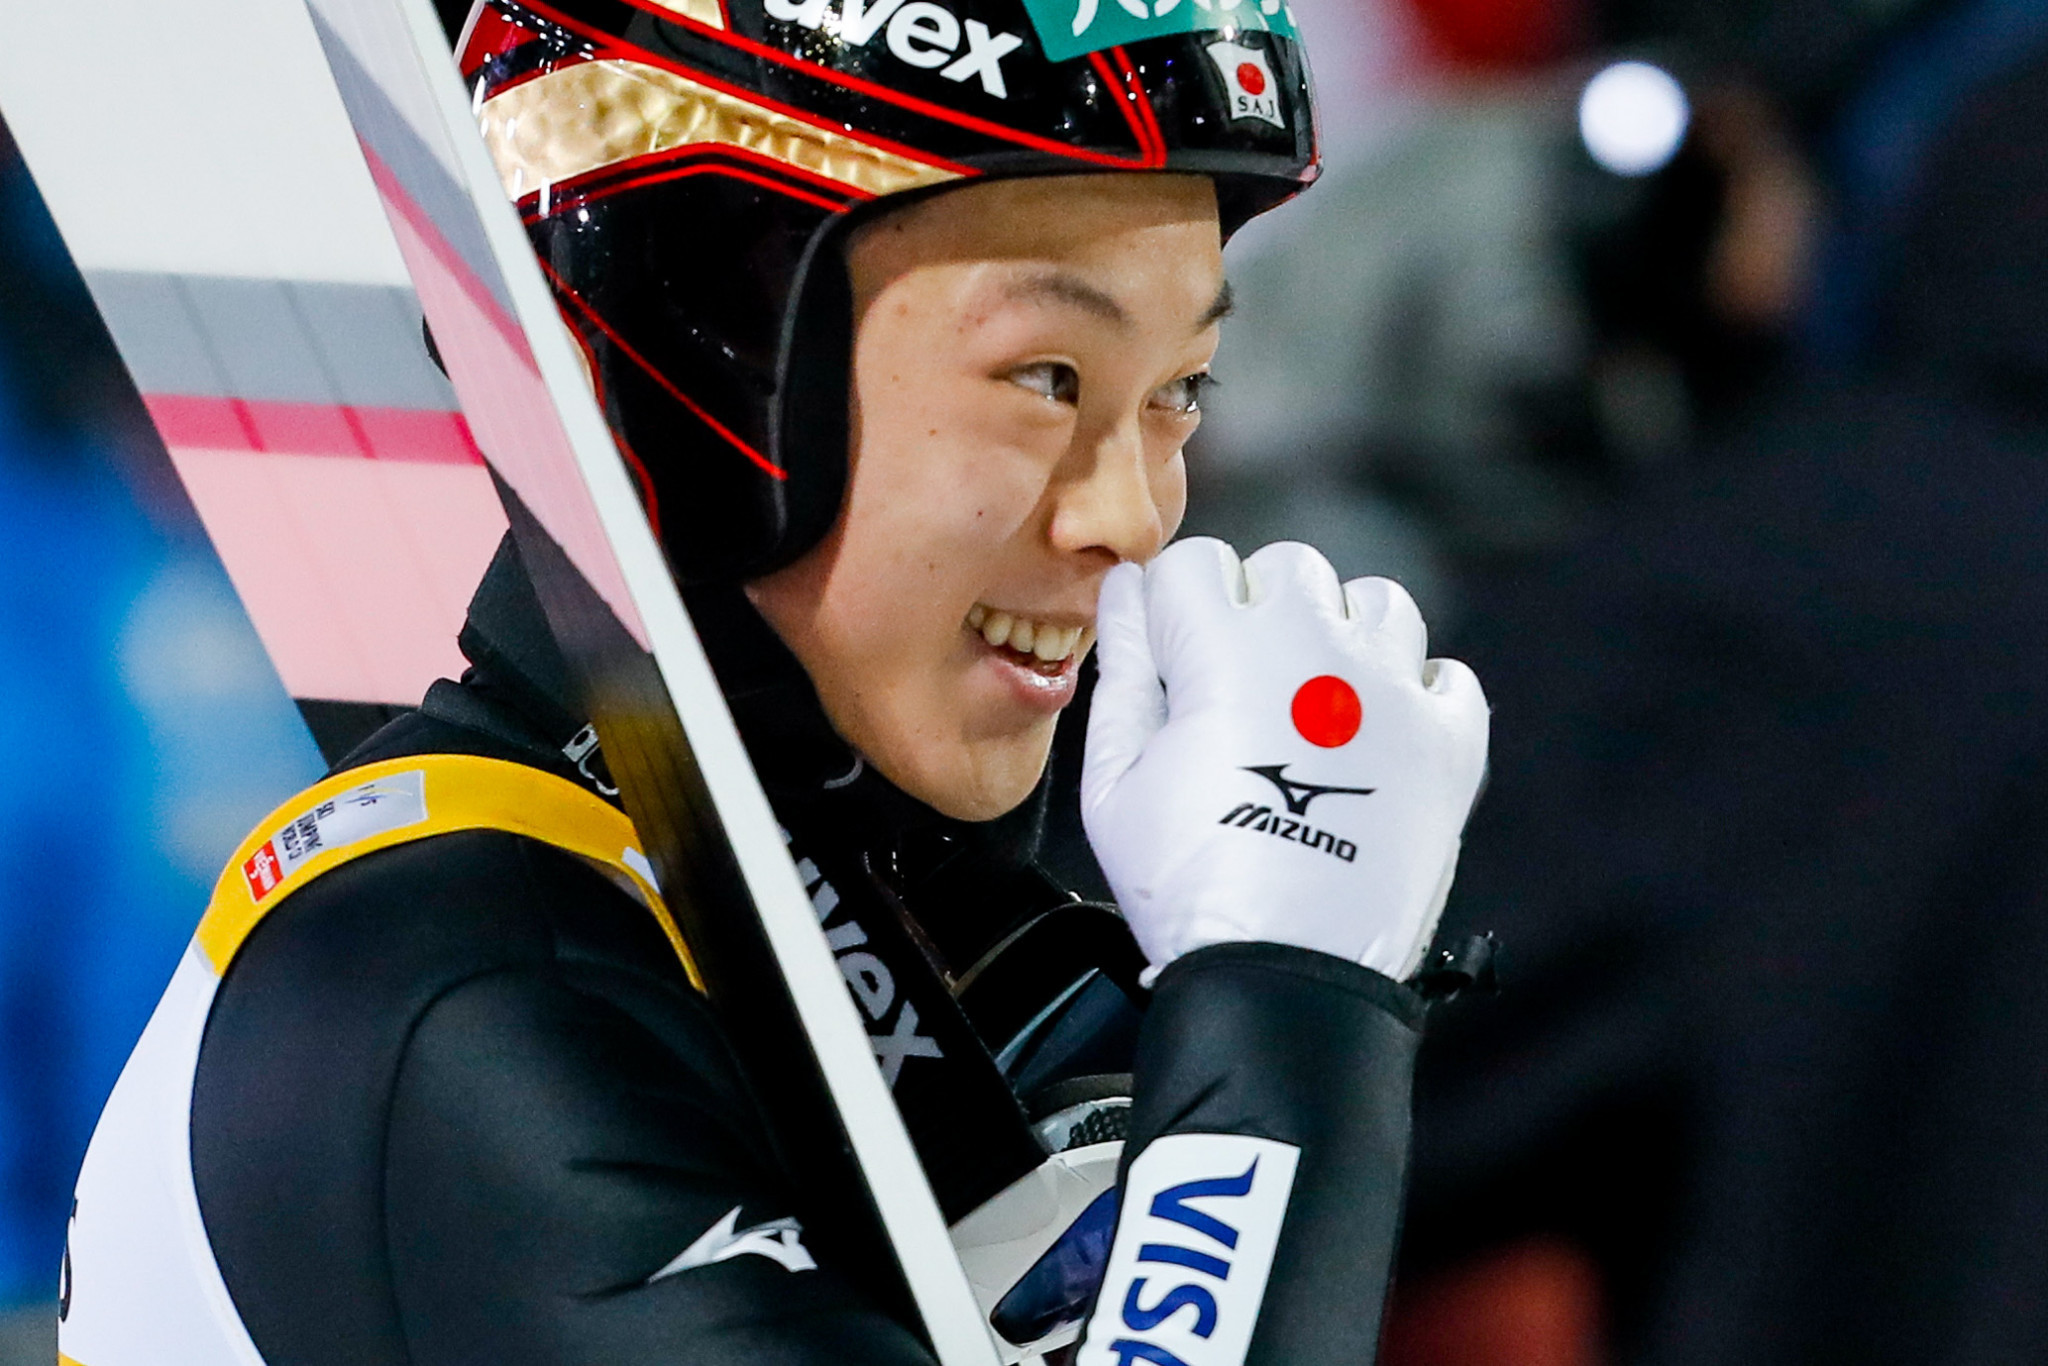 Japan's Ryoyu Kobayashi won in Oberstdorf for the first time in six events ©Getty Images